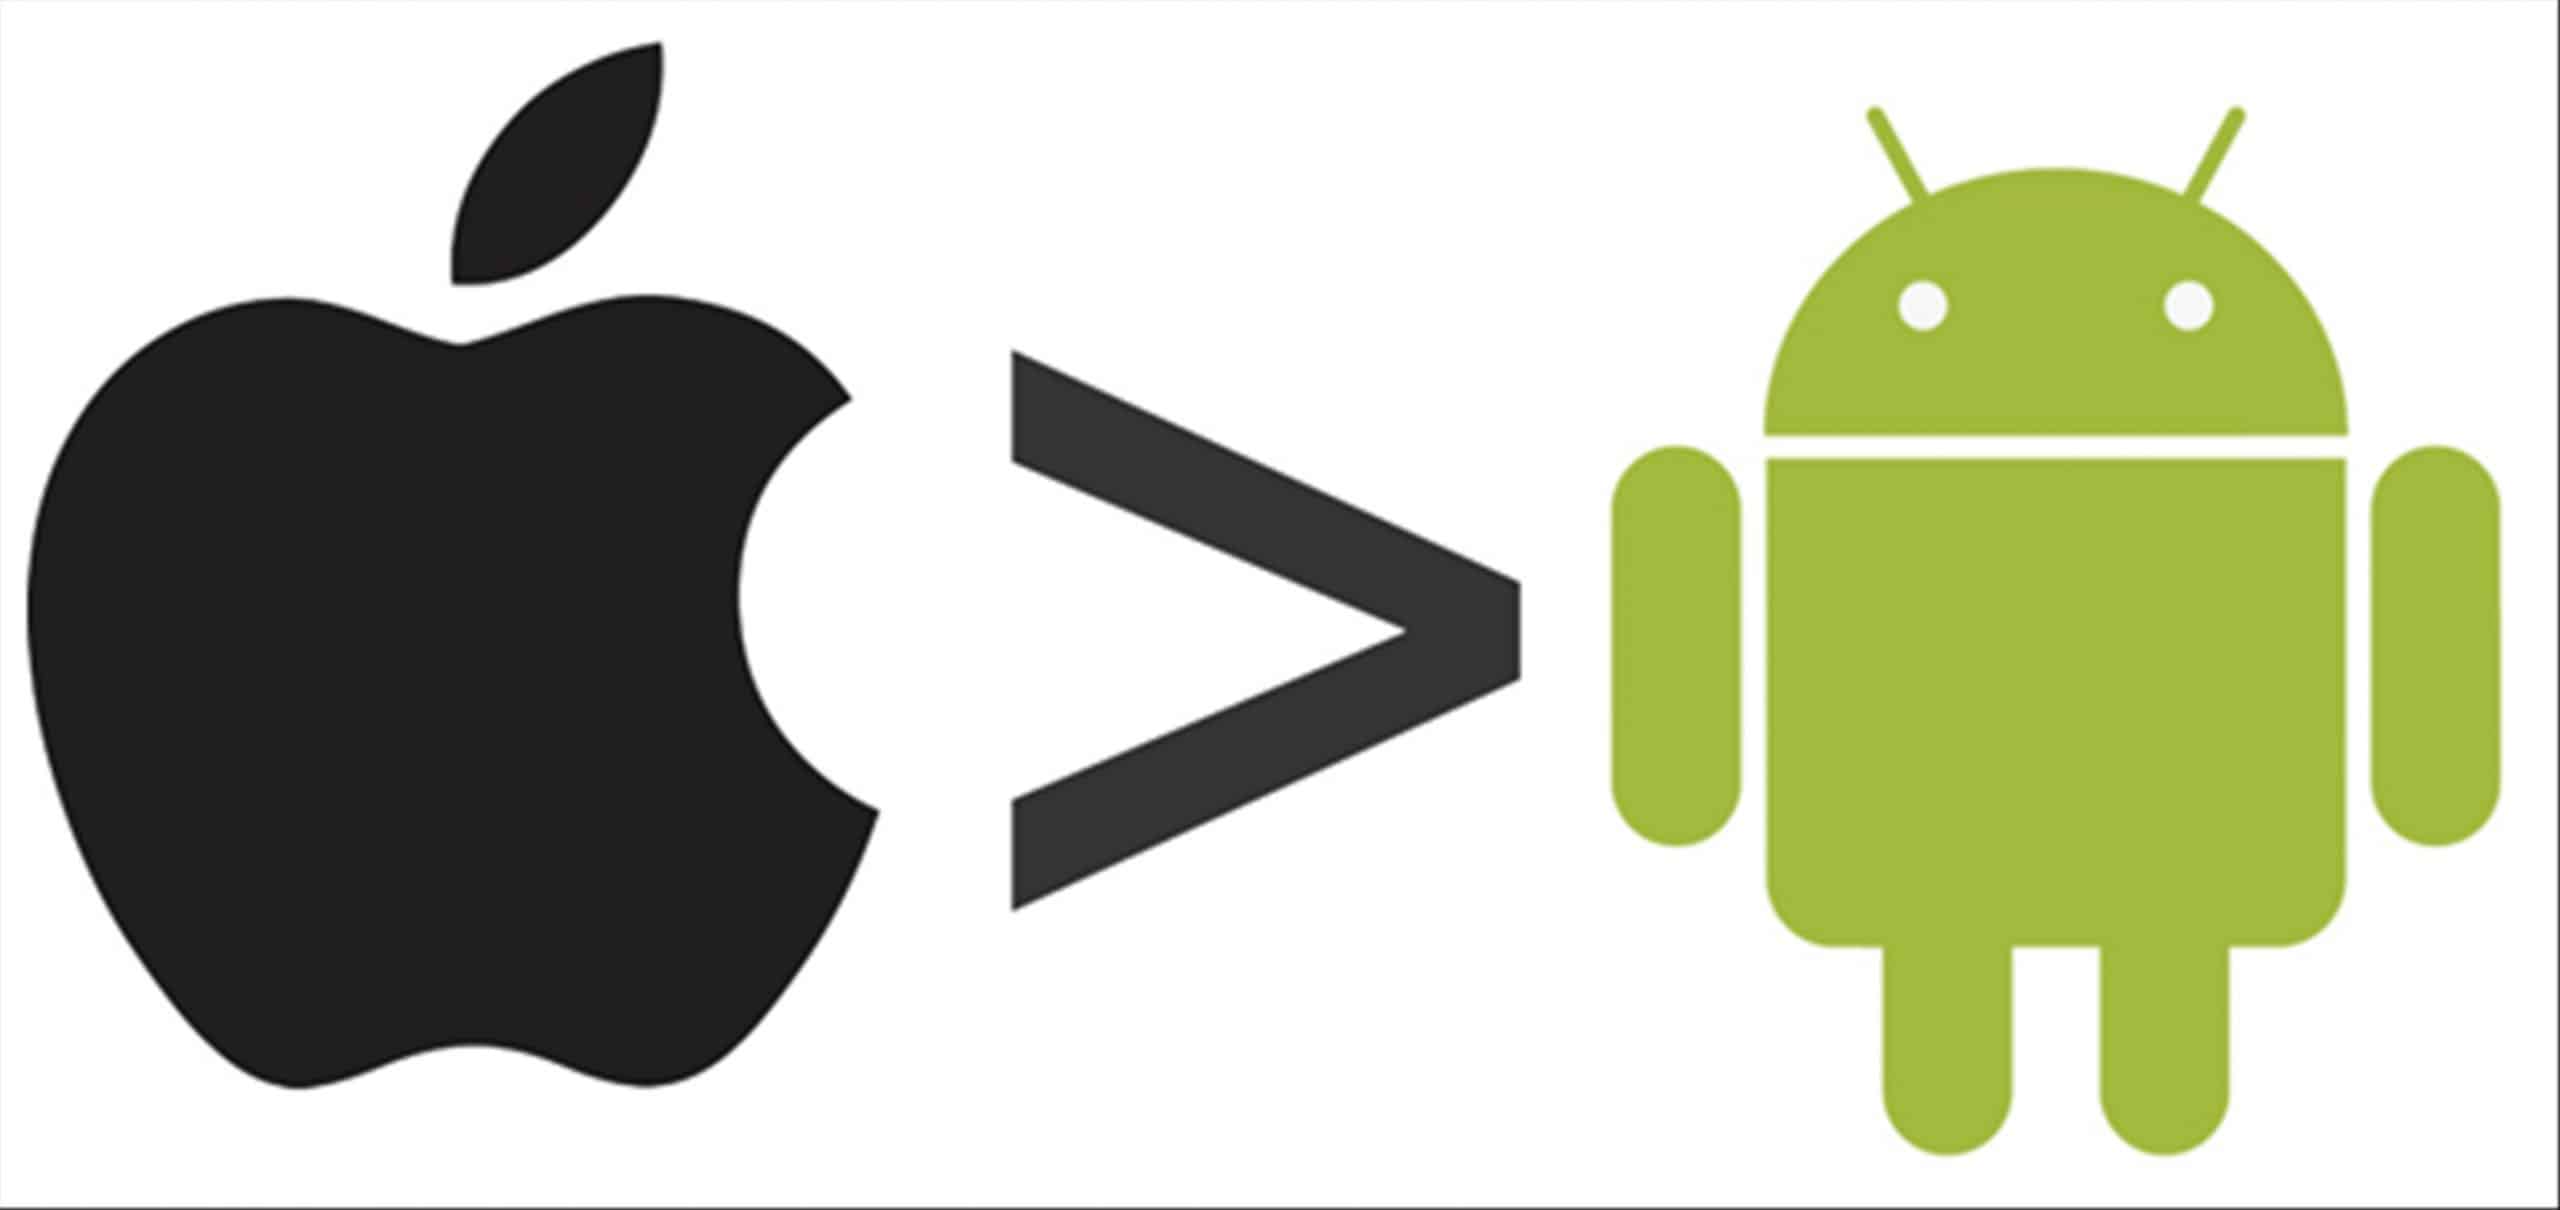 ios vs android - which one is better